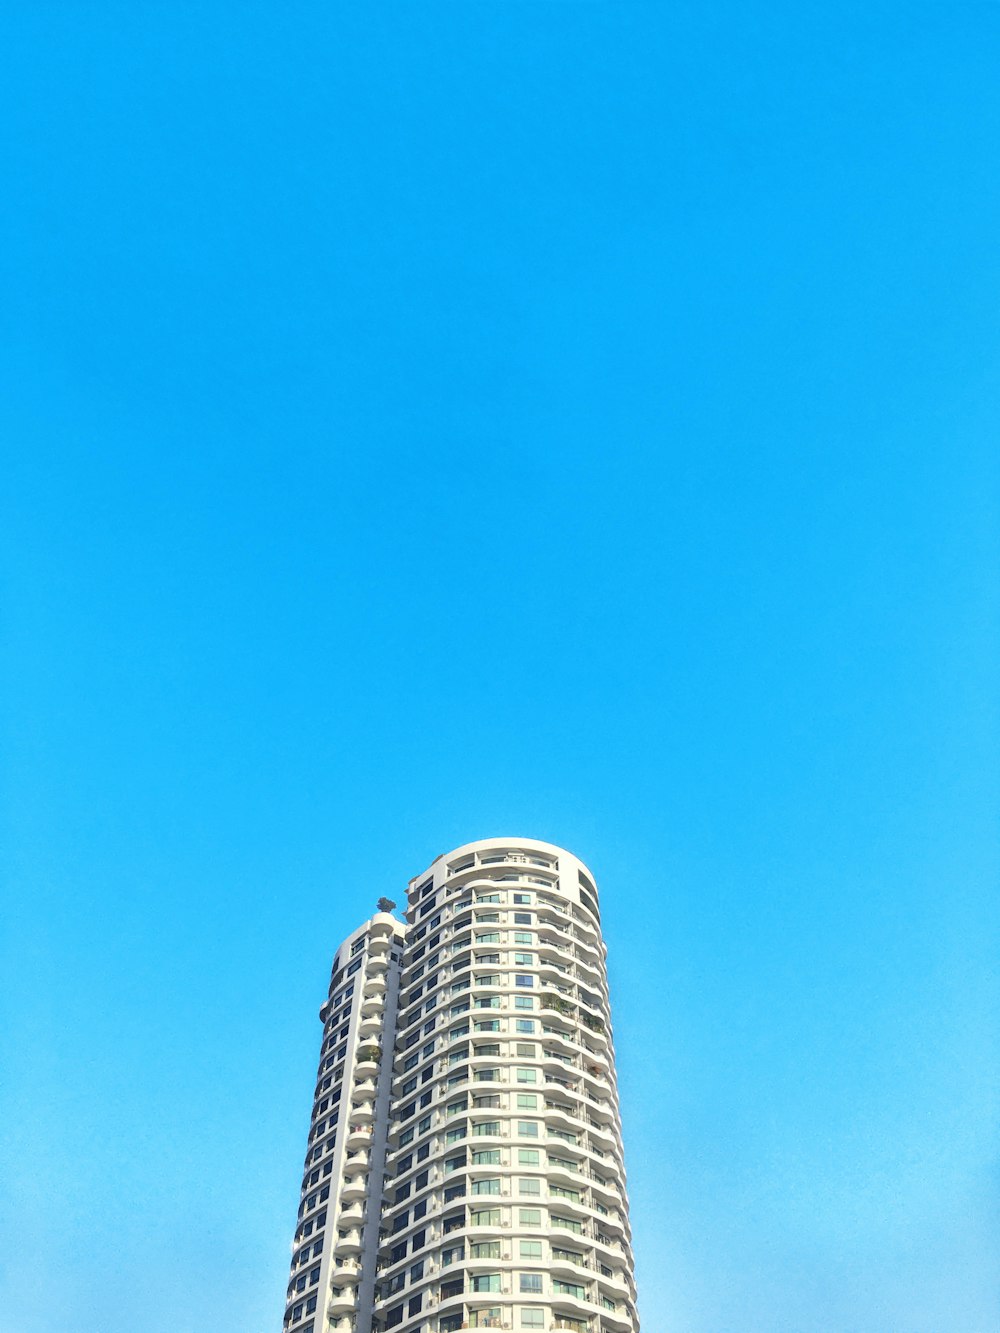 white and blue concrete building under blue sky during daytime